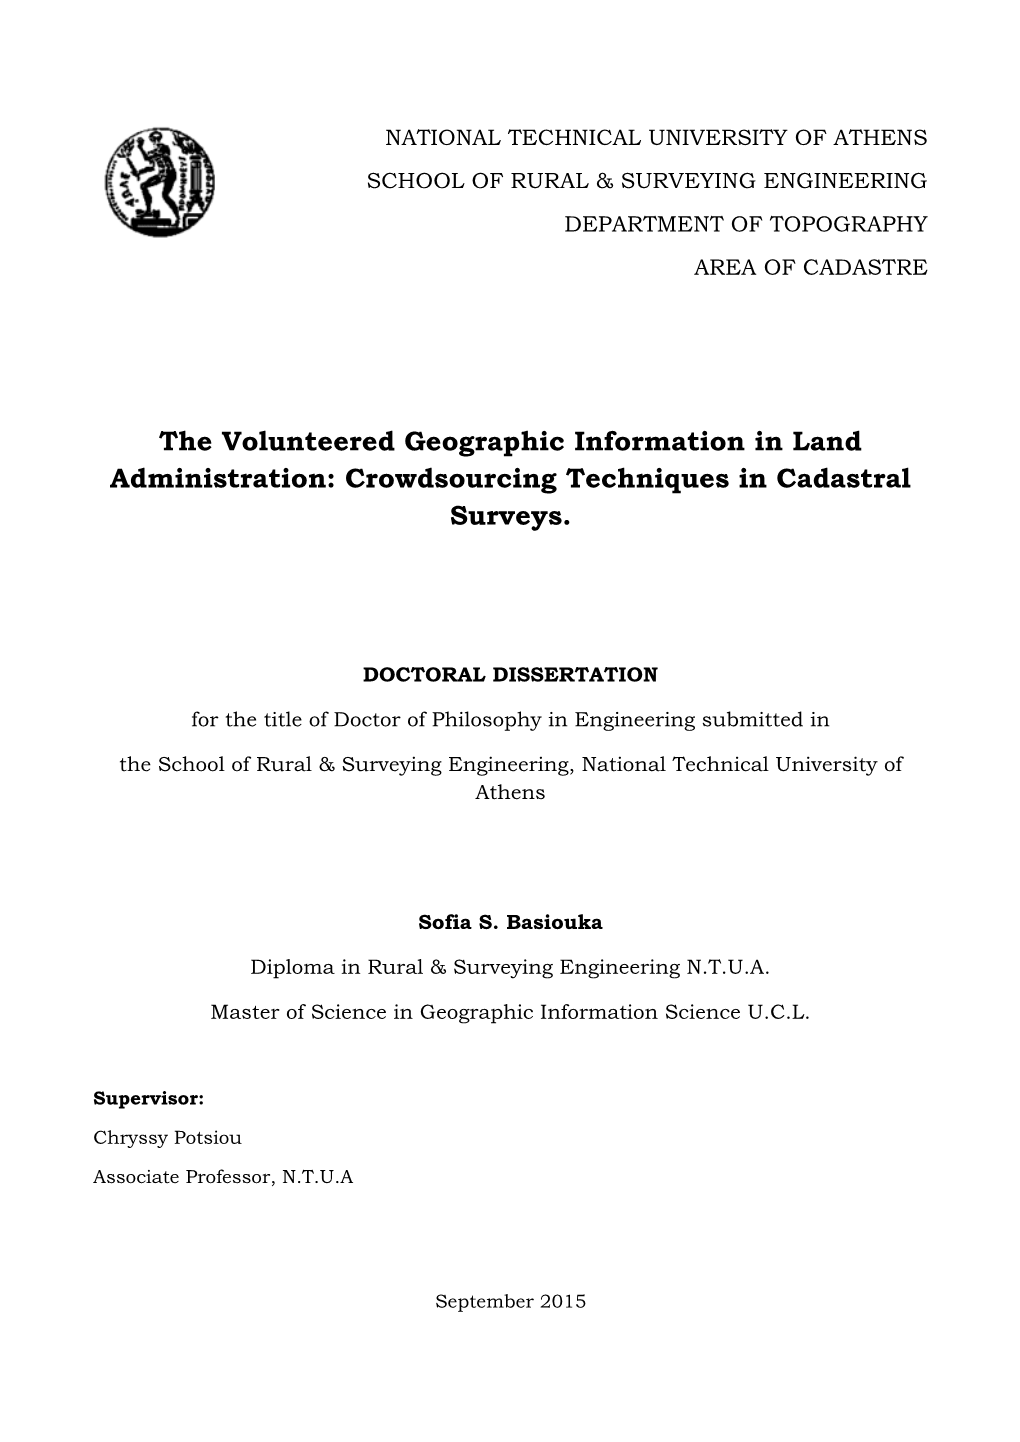 The Volunteered Geographic Information in Land Administration: Crowdsourcing Techniques in Cadastral Surveys